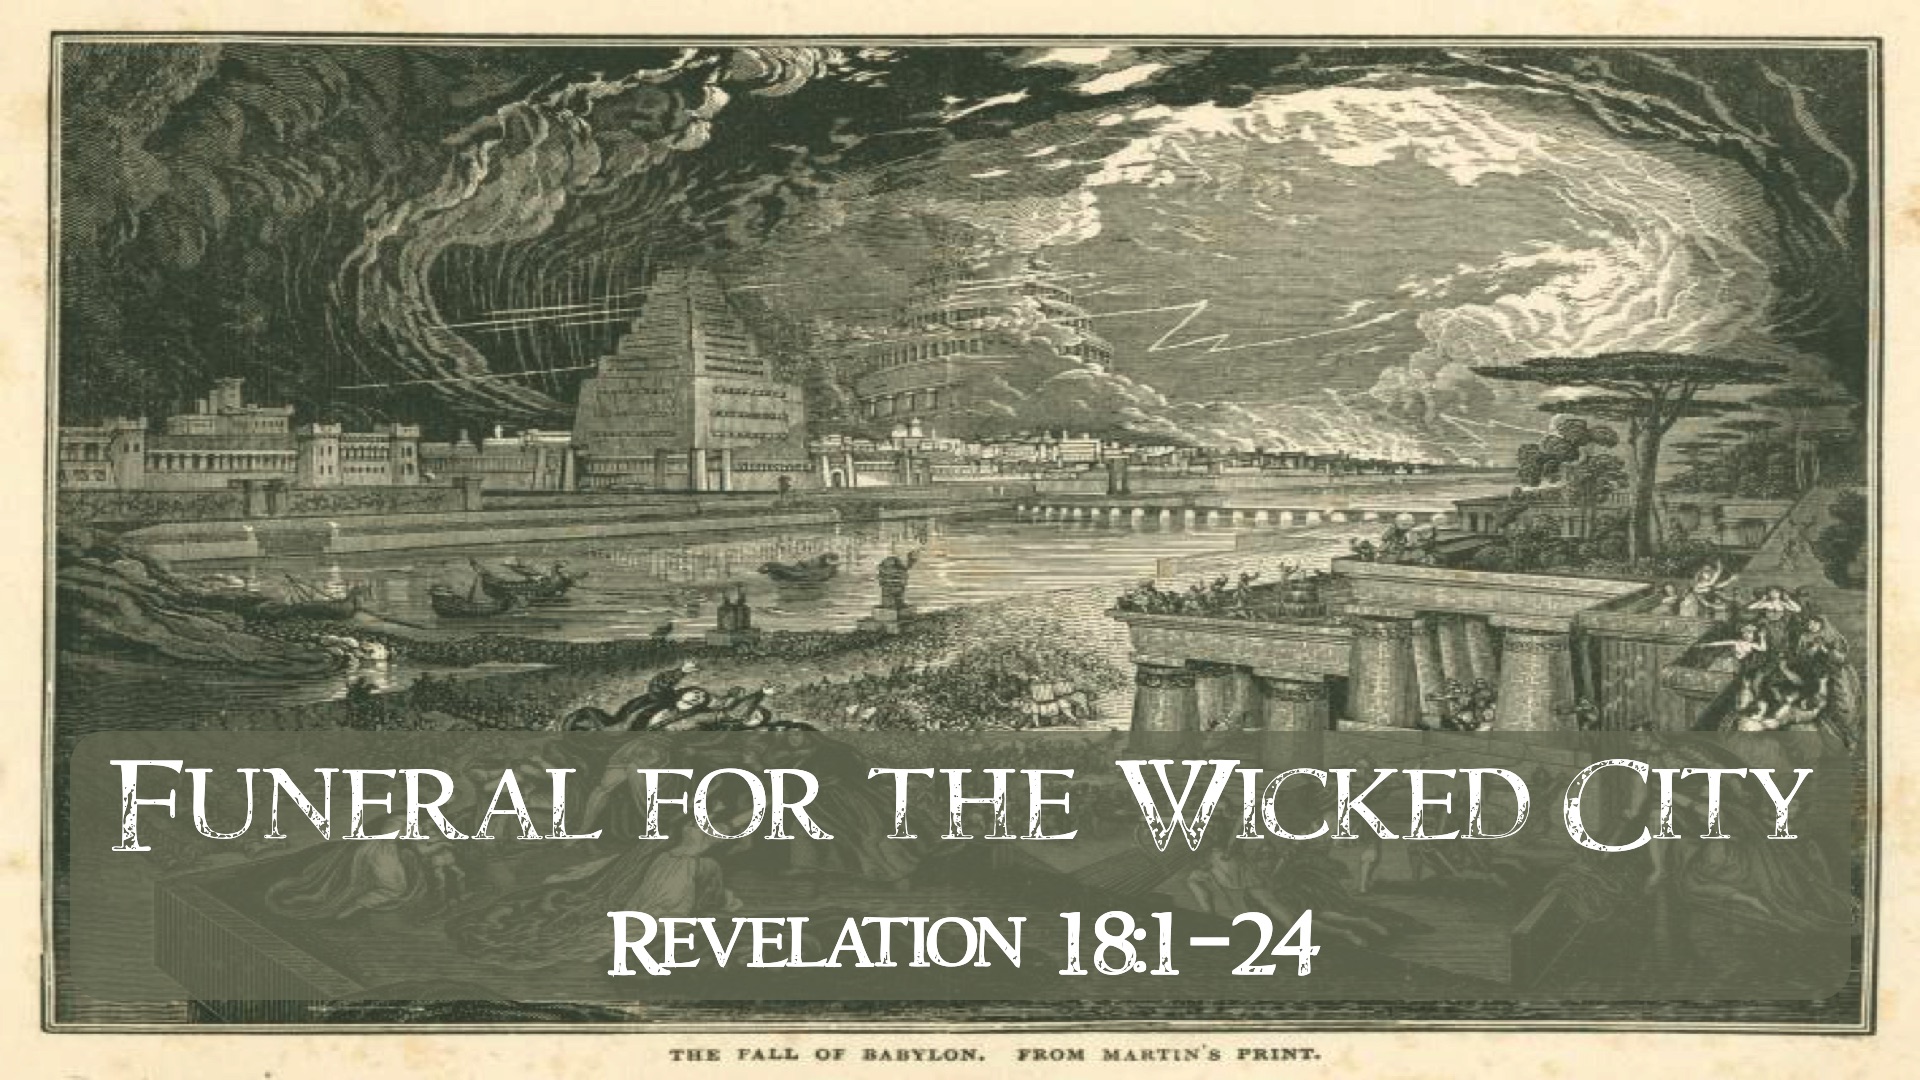 “The Book of Revelation: Funeral for the Wicked City”